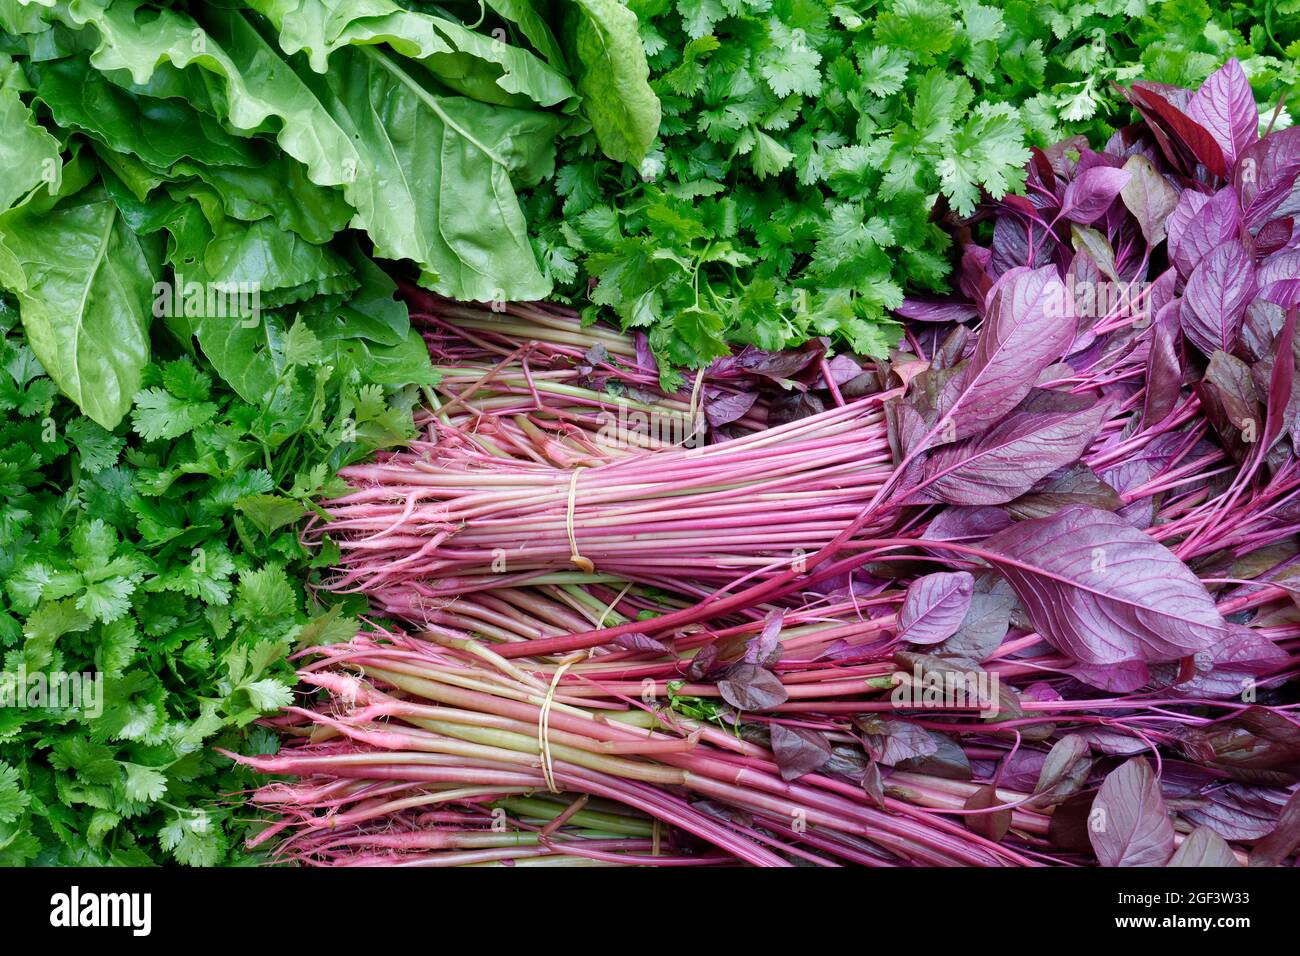 Freshly harvested organic vegetables : Coriander, Chard and Red Amaranth Stock Photo